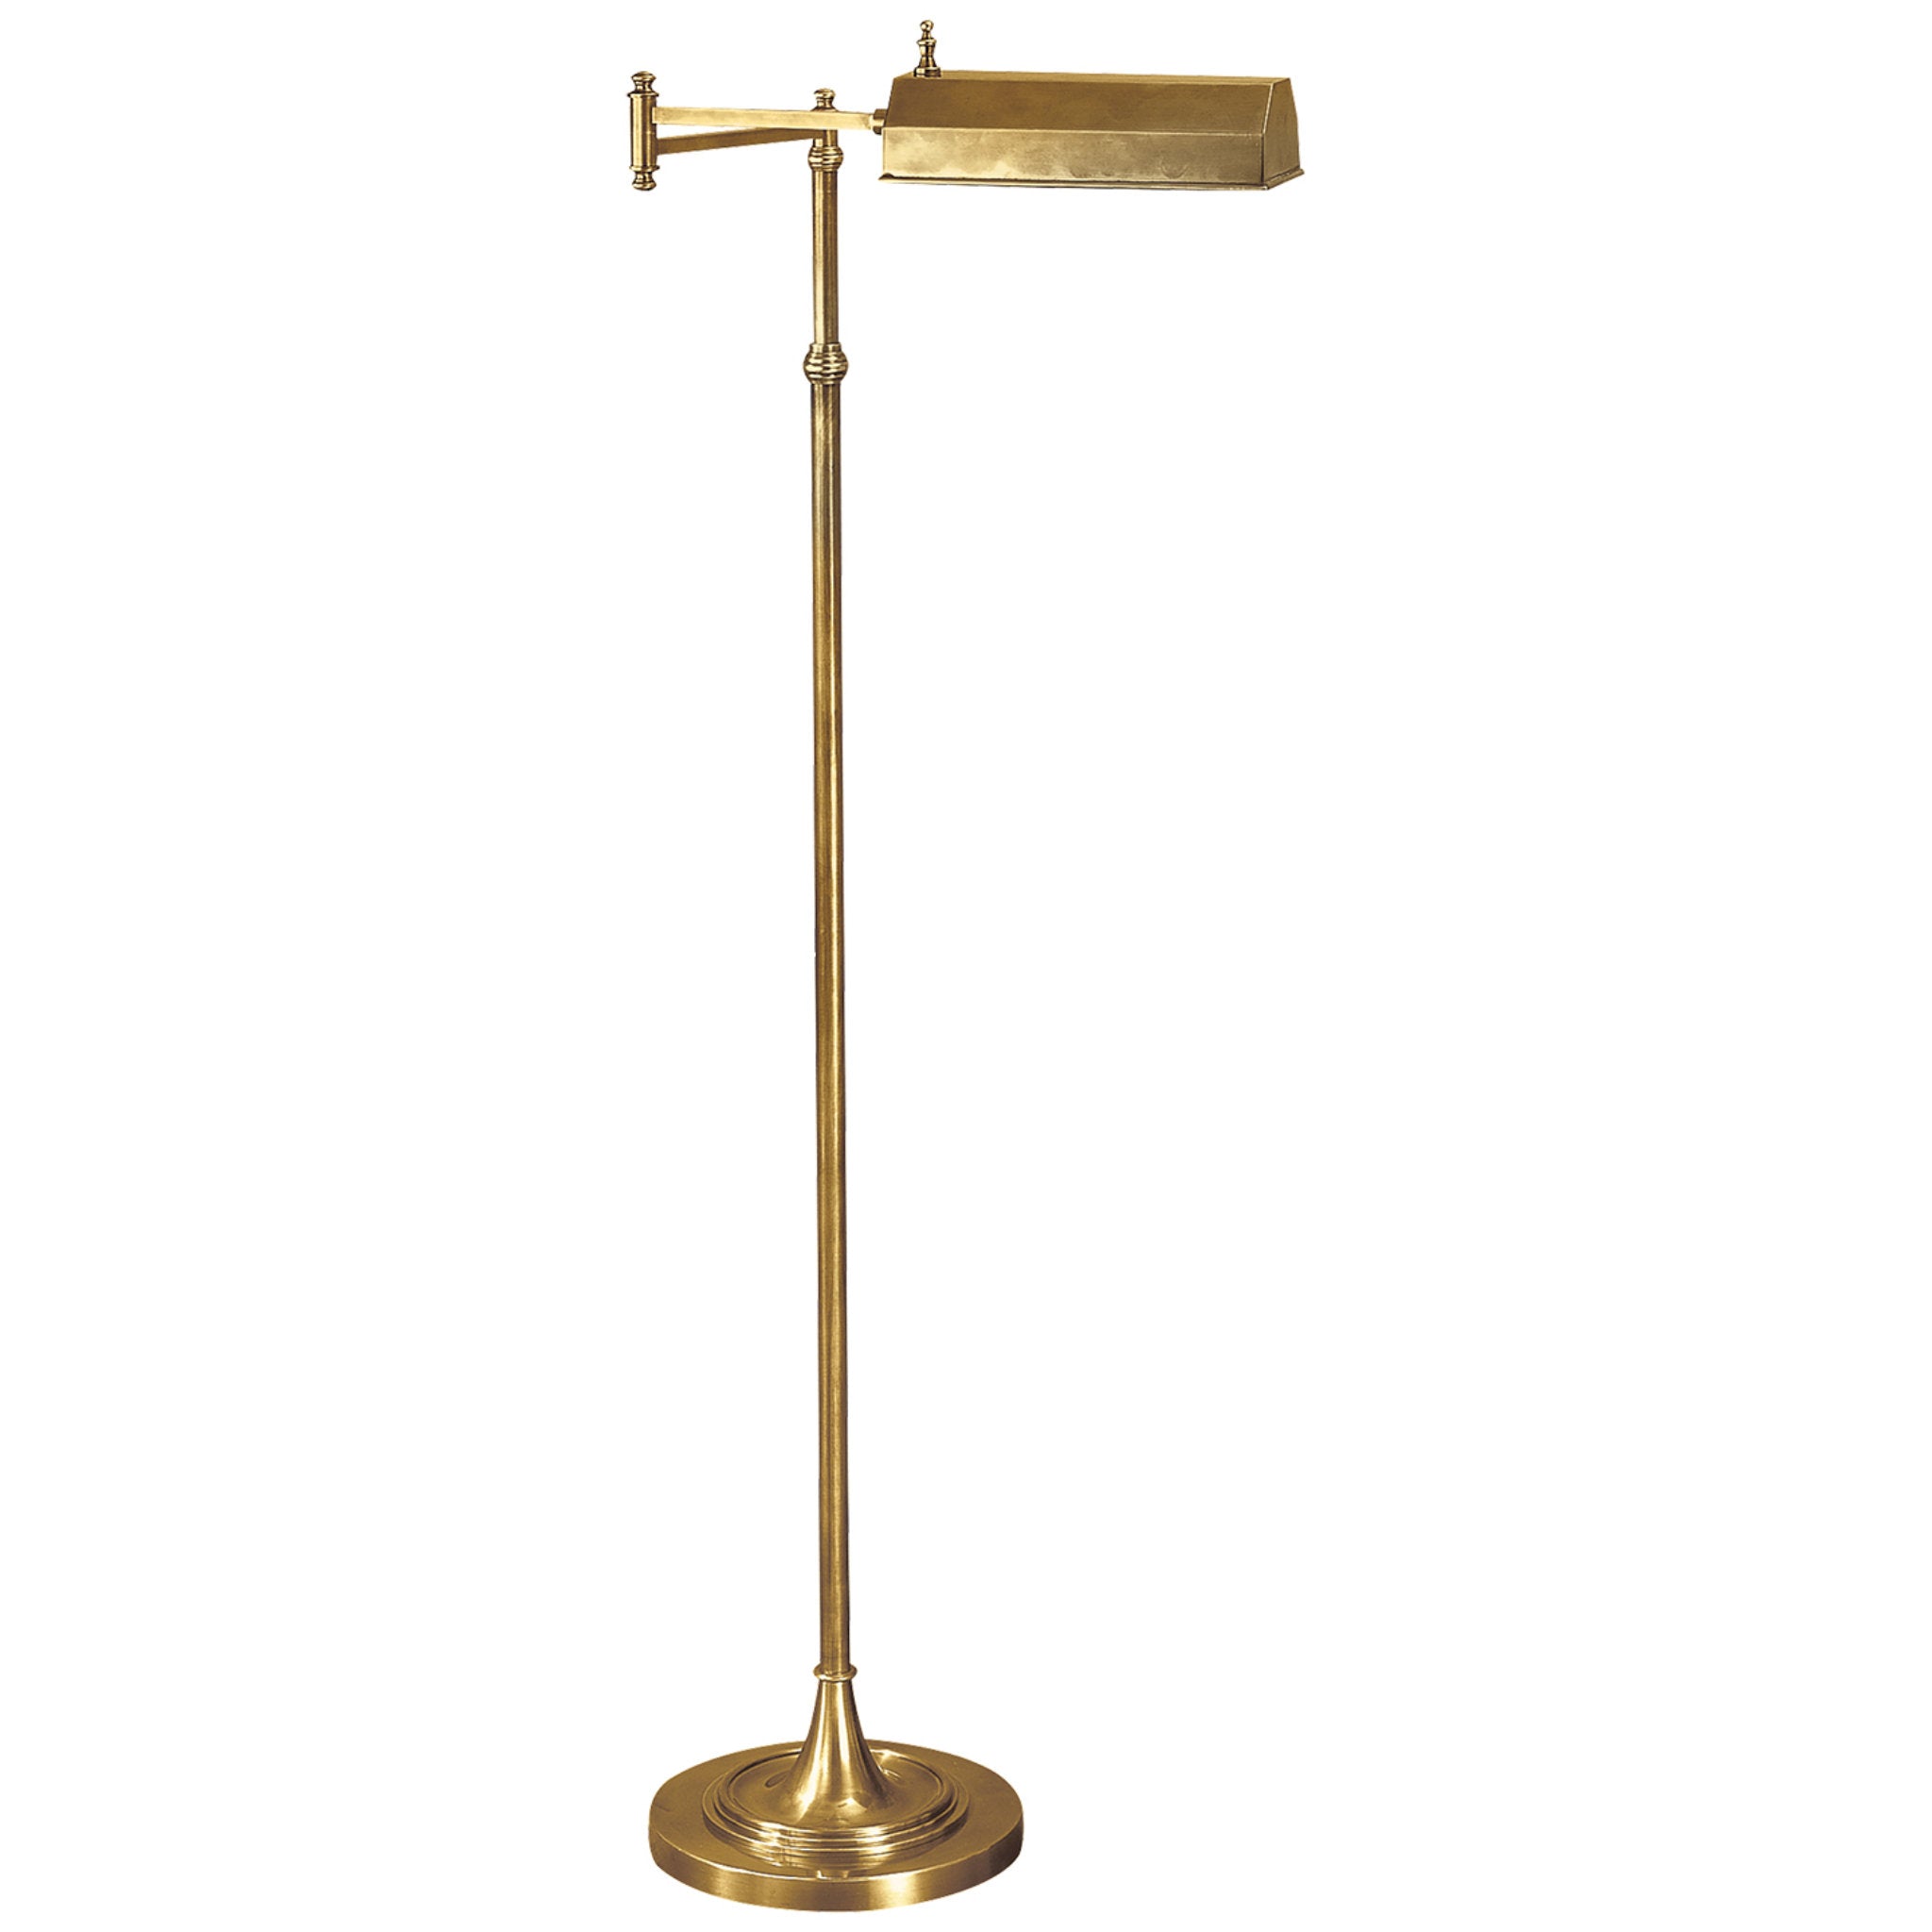 Chapman & Myers Dorchester Swing Arm Pharmacy Floor Lamp in Antique-Burnished Brass